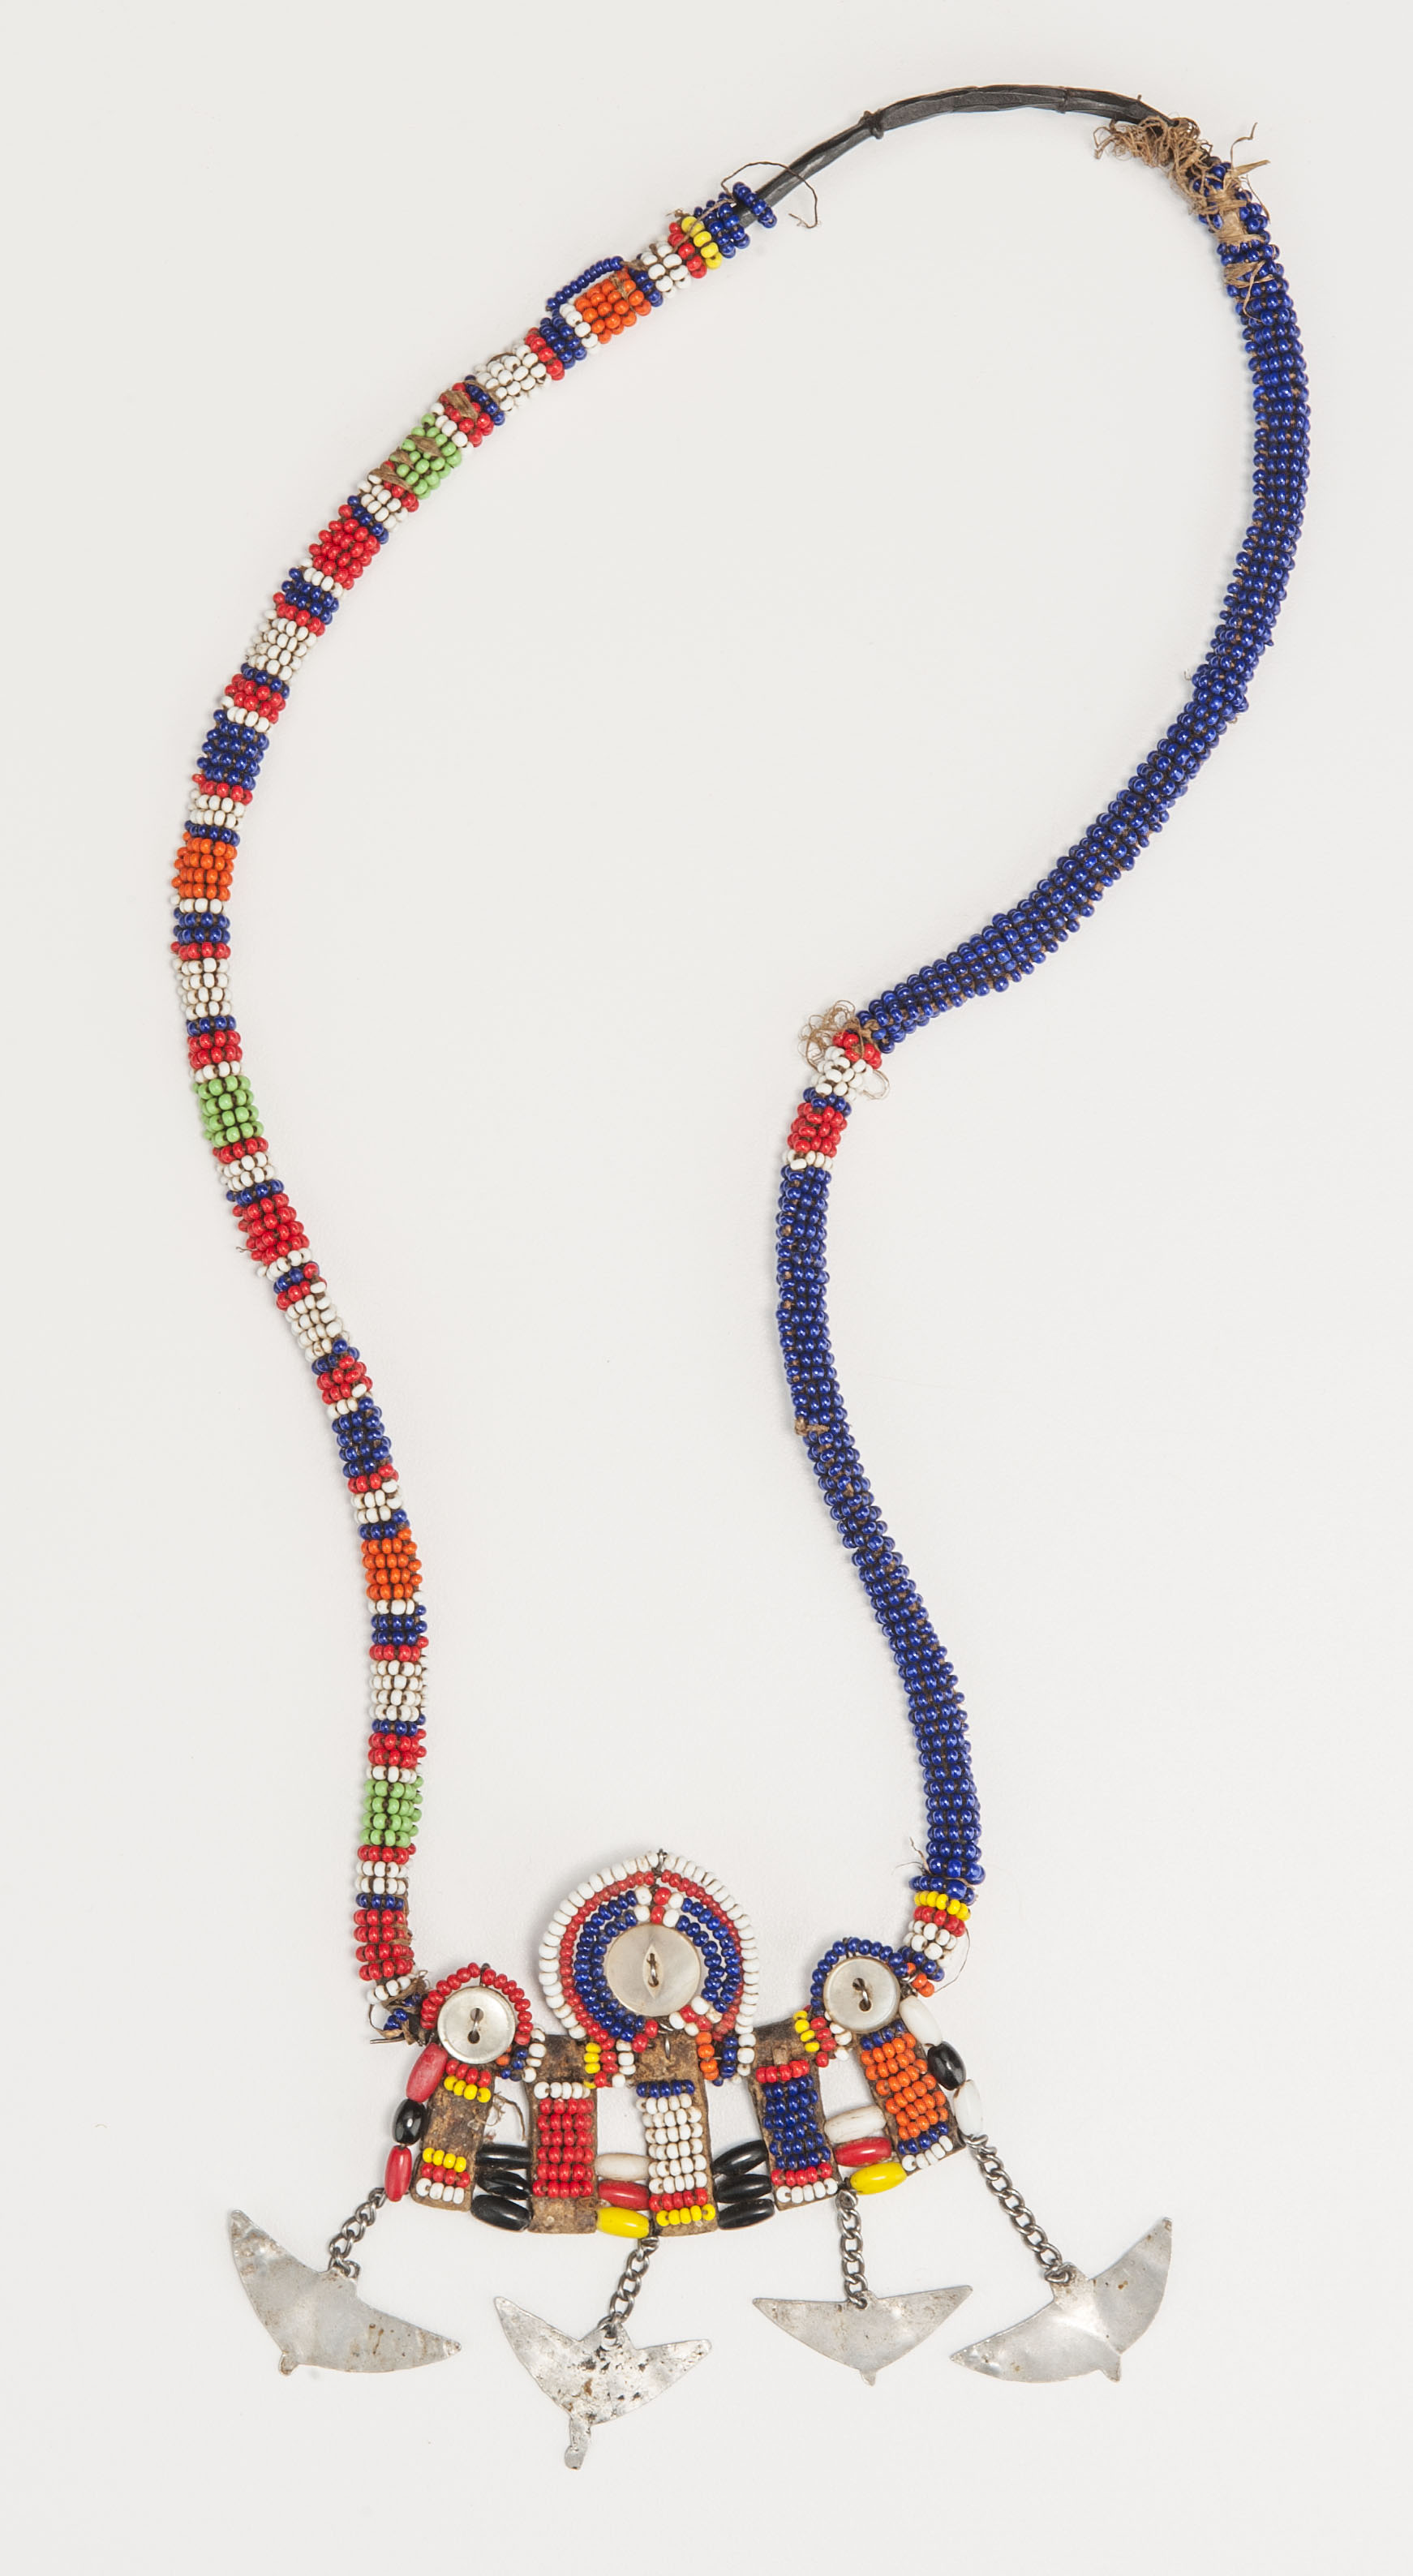 Collana da uomo by Unknown Artist - collected in Wamba in the 1970s - 36.8 x 13.7 cm 